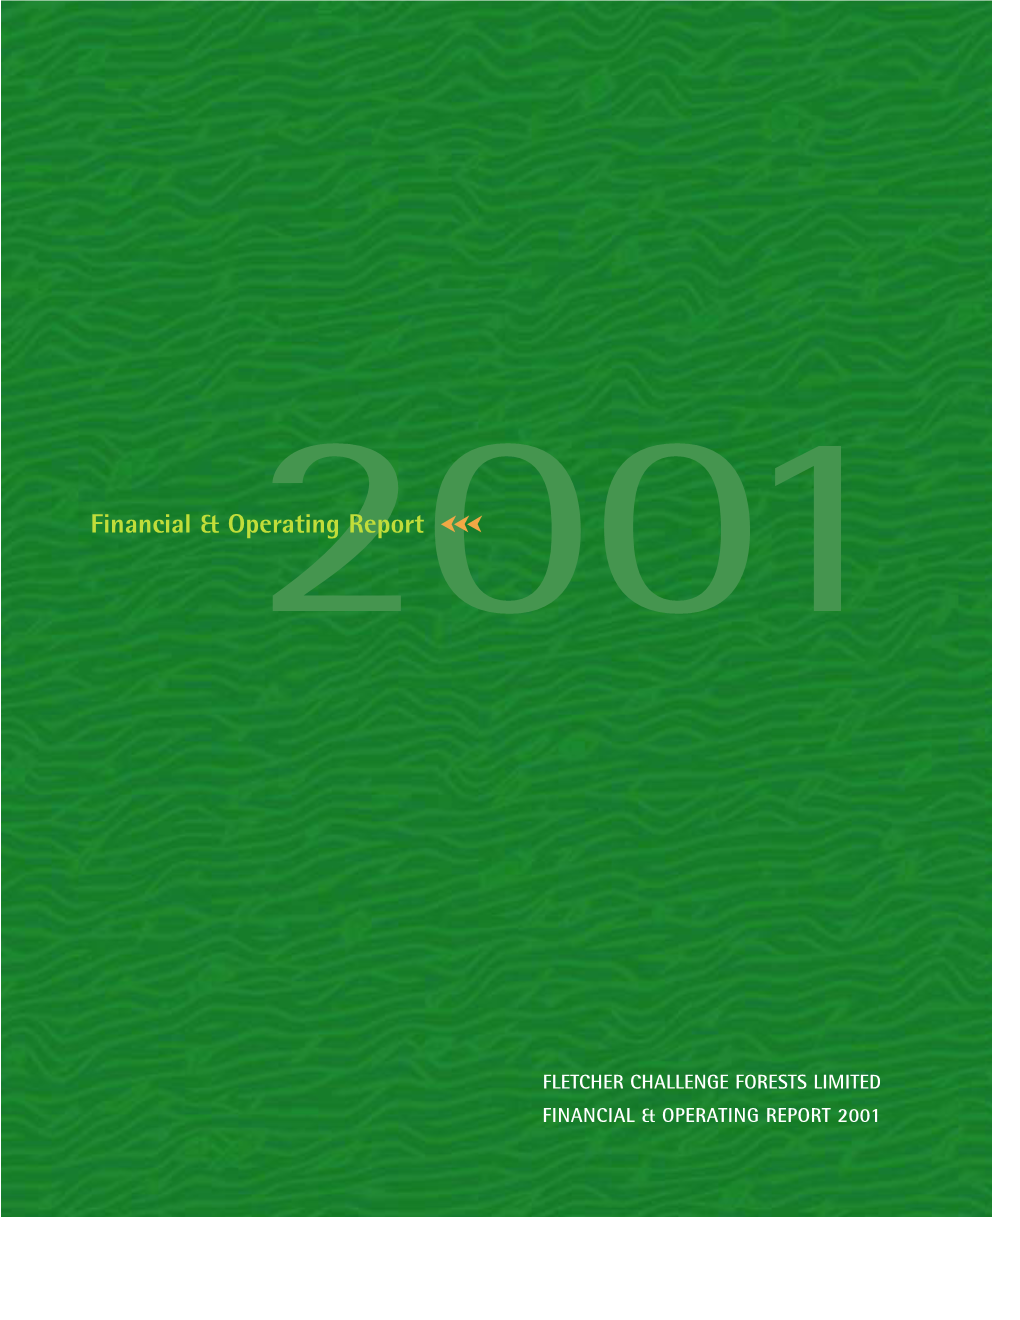 Financial & Operating Report